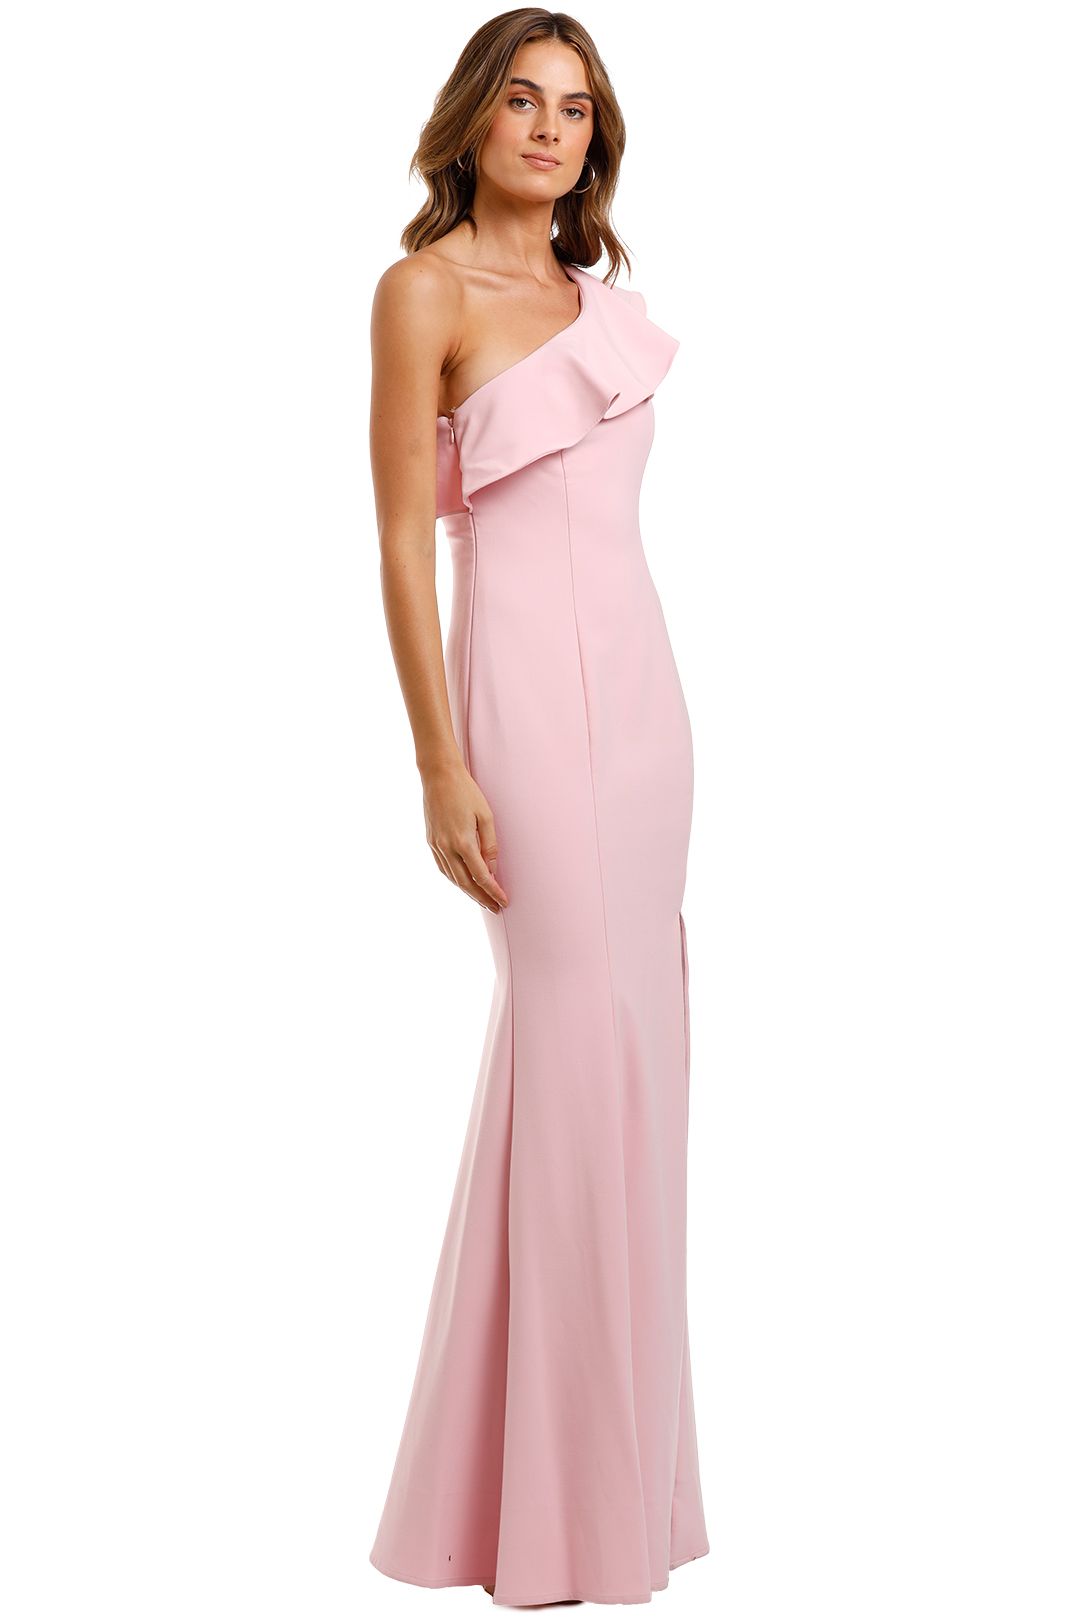 Likely NYC Kane Gown Pink